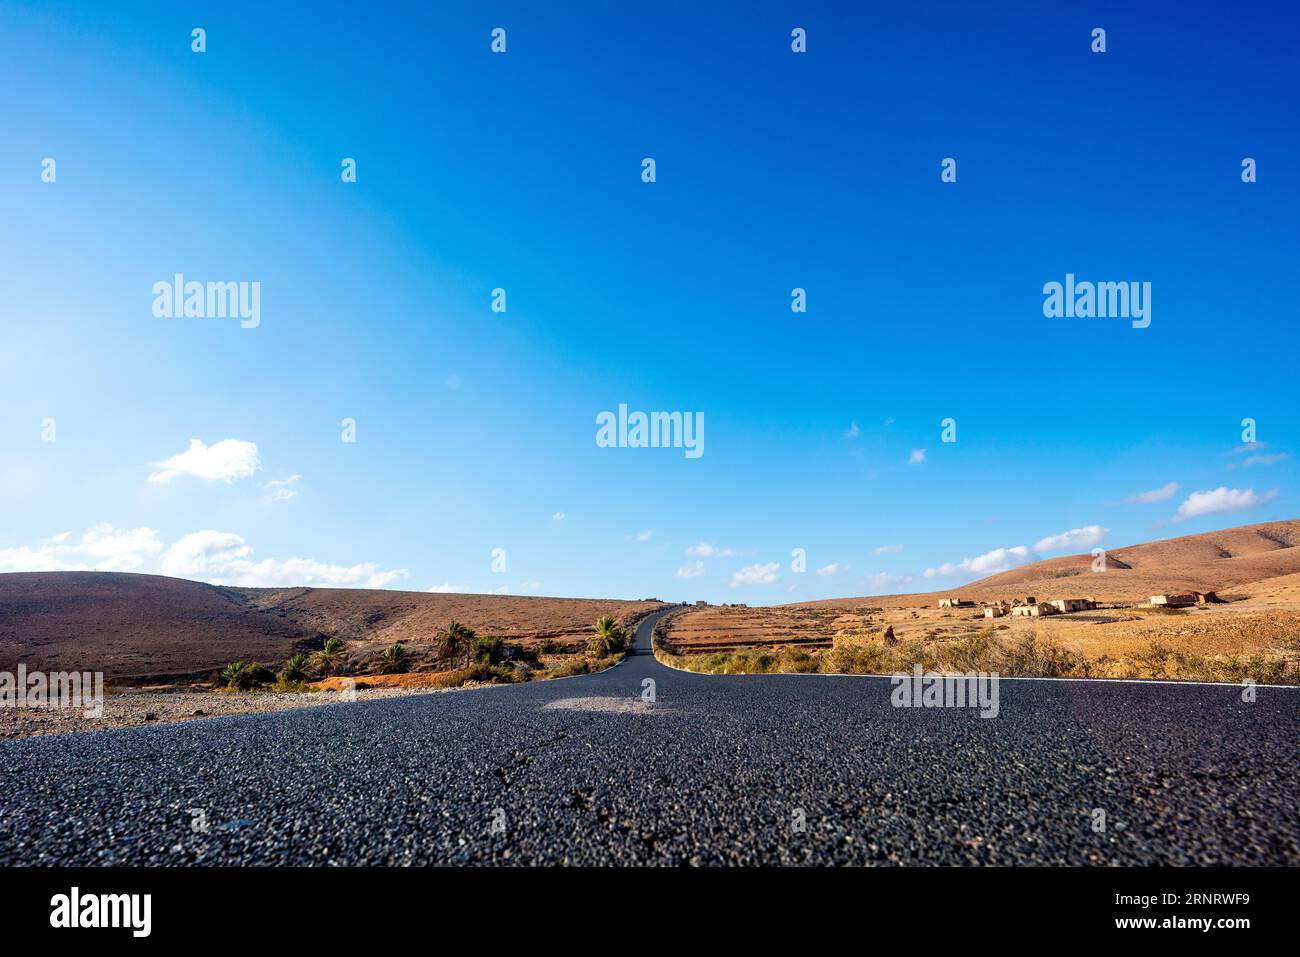 A long, winding road that seems to lead to nowhere. The road is empty, and the only thing in sight is a few cacti and a distant mountain range. The sk Stock Photo